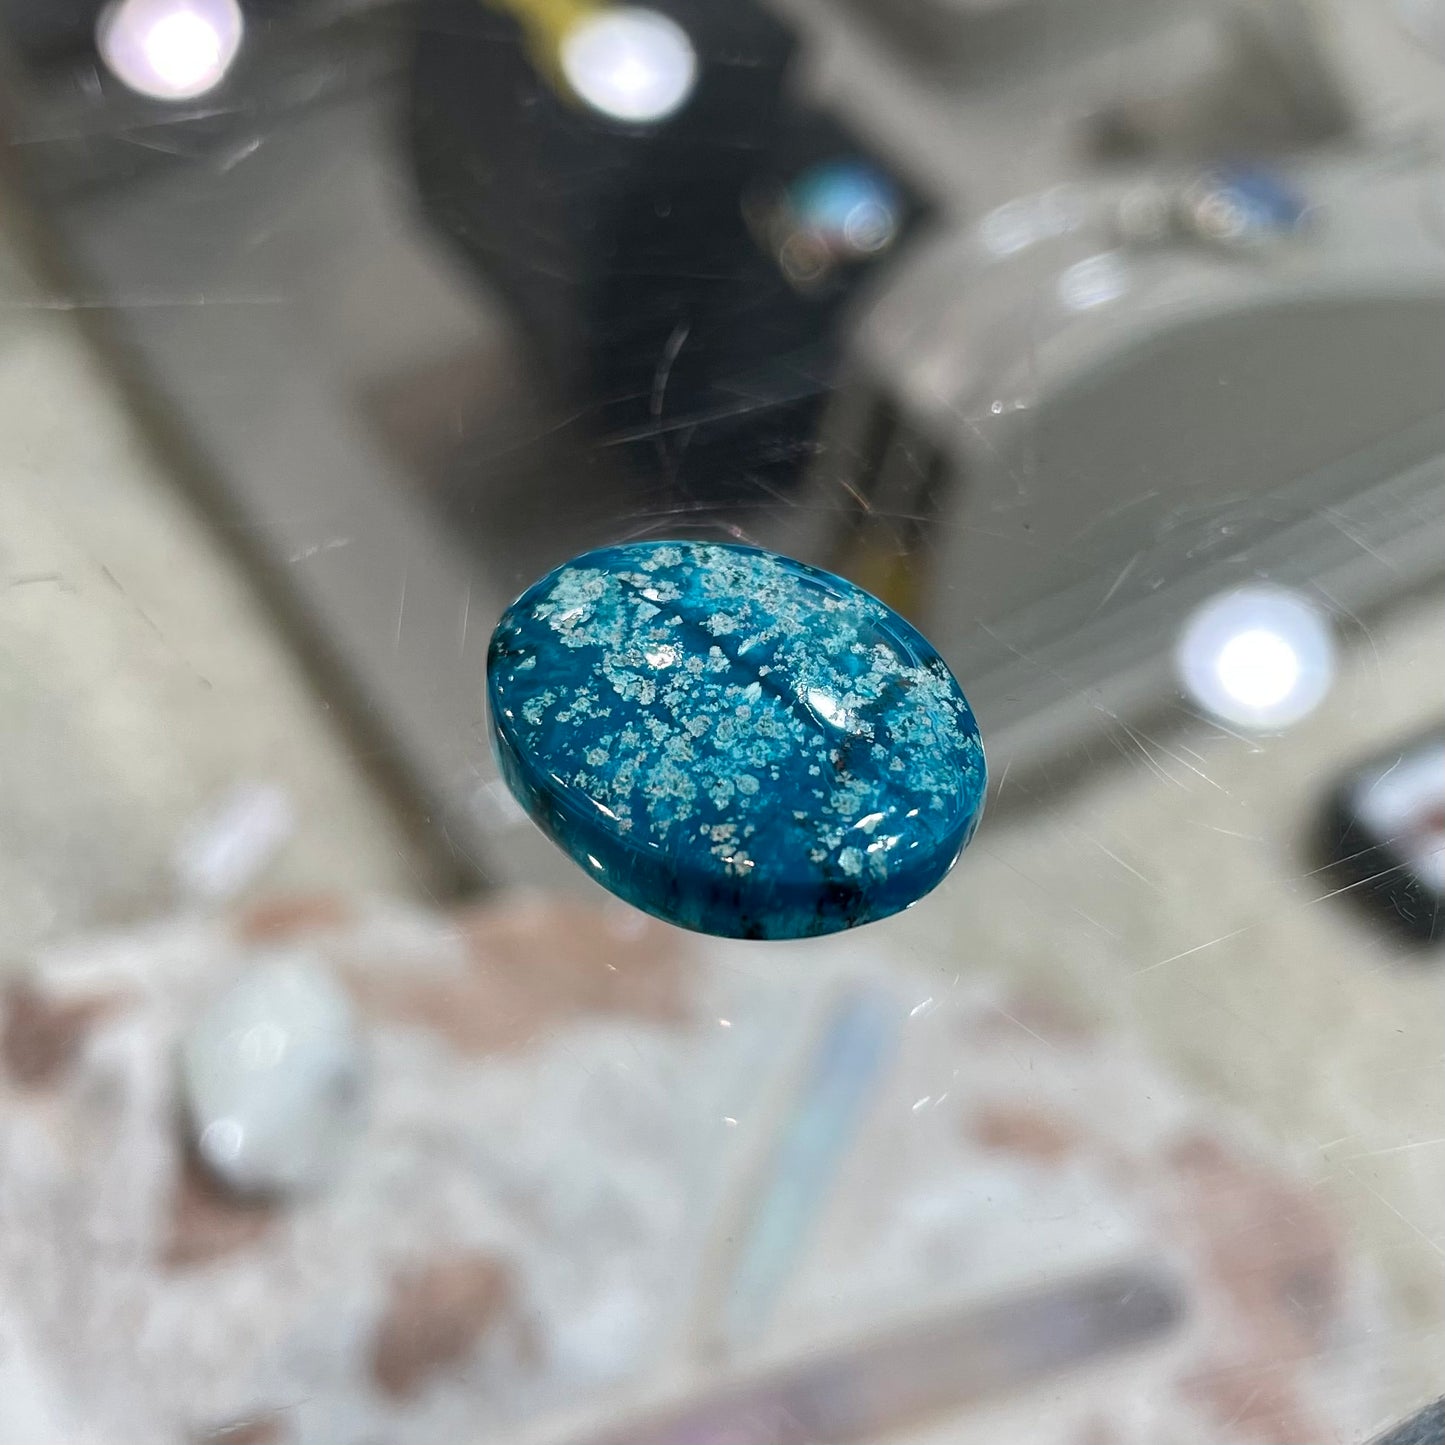 A loose, oval cabochon cut turquoise stone from Morenci, Arizona.  The stone has azurite inclusions.